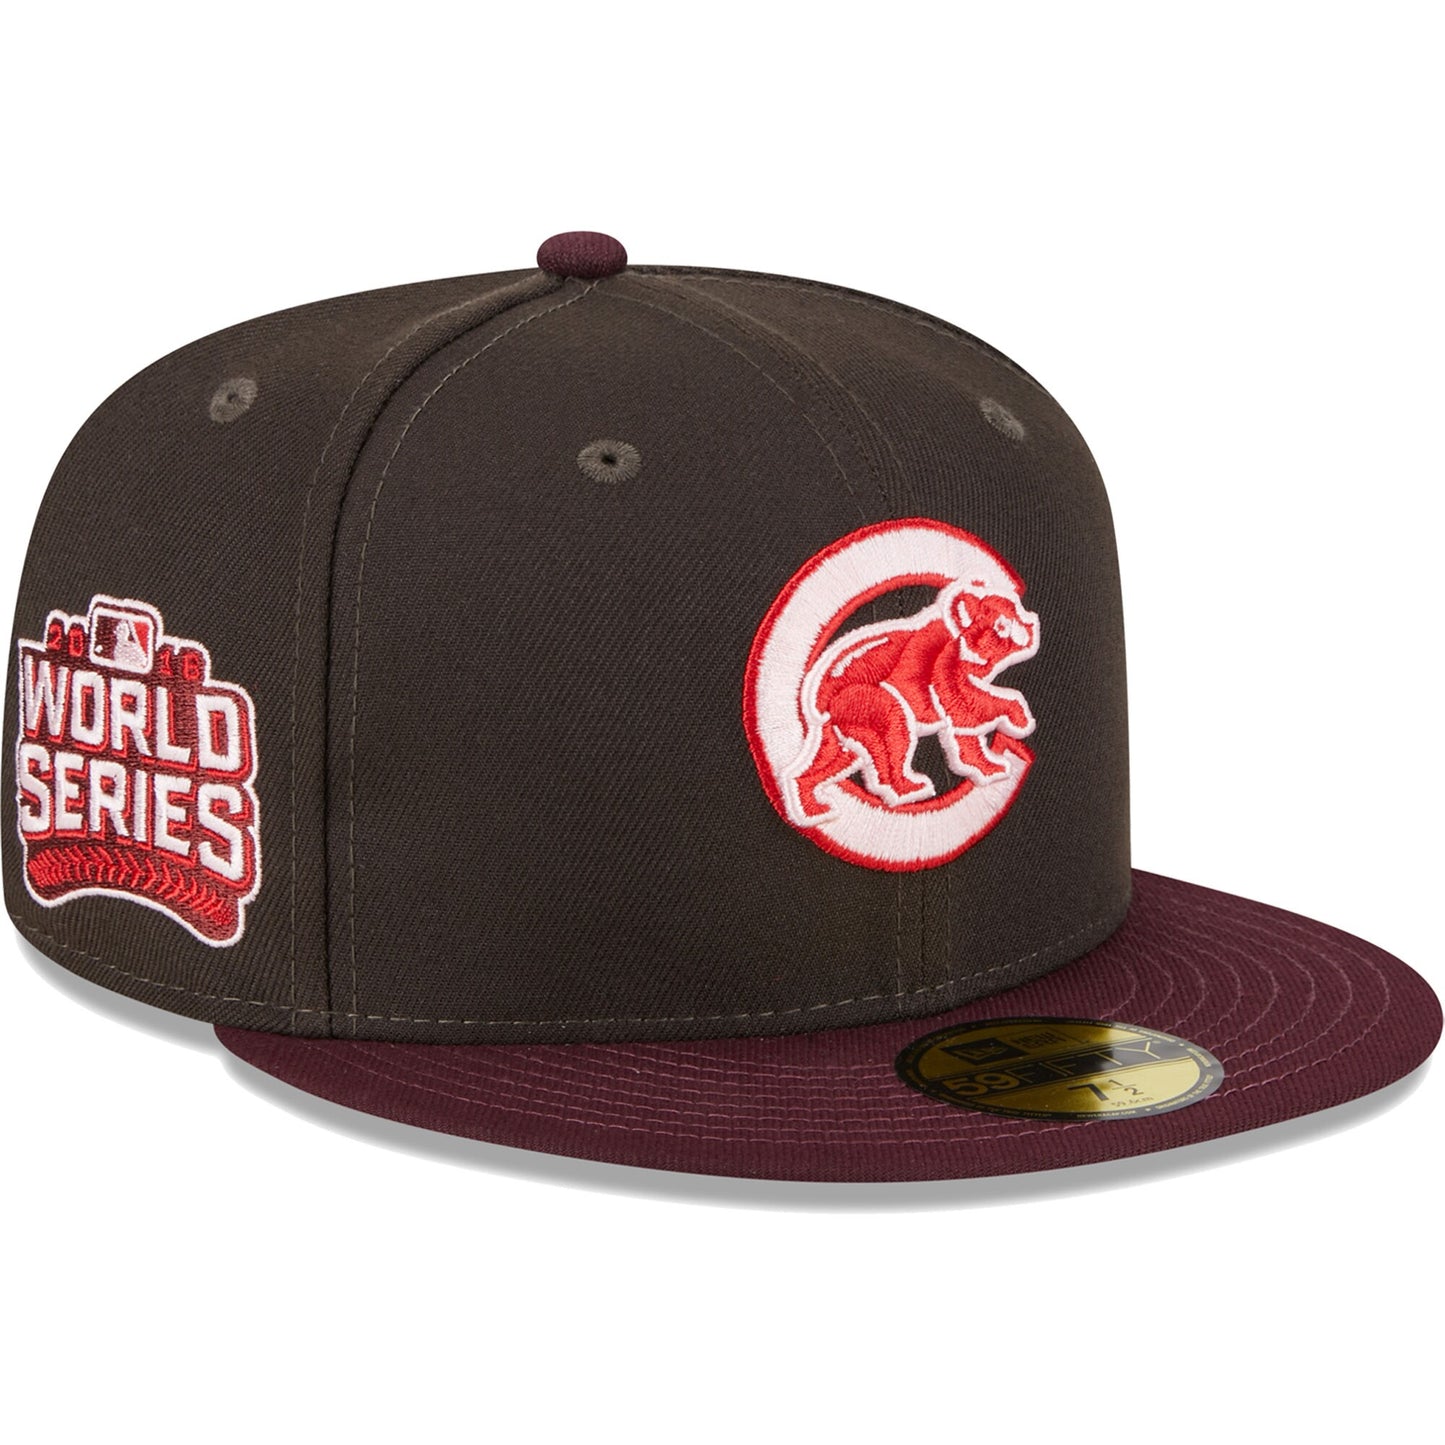 Chicago Cubs New Era Chocolate Strawberry 59FIFTY Fitted Hat - Brown/Maroon